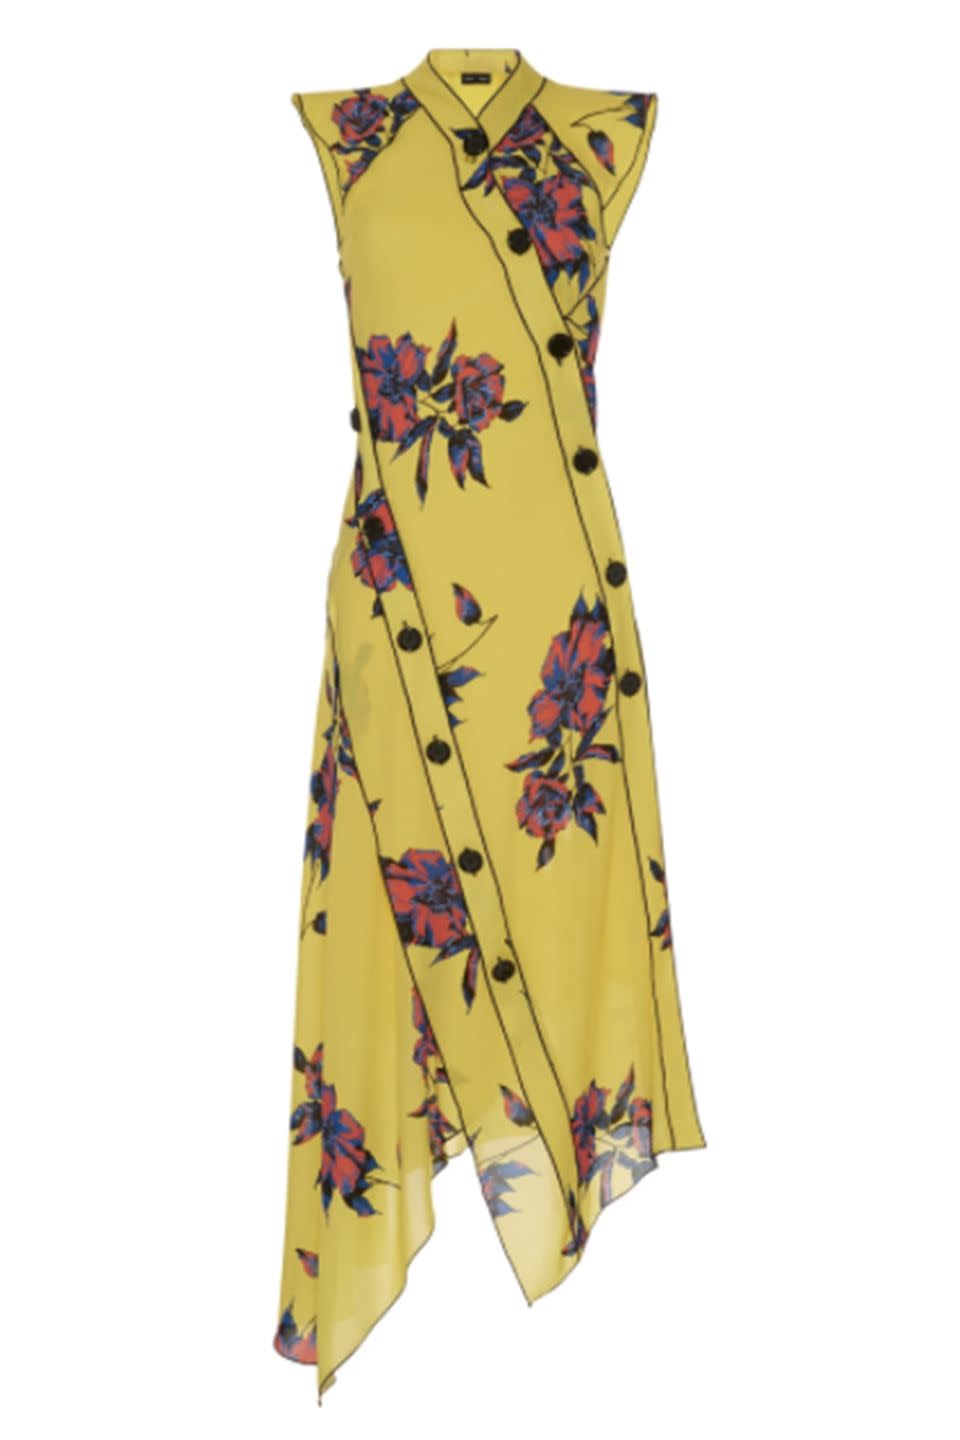 33 Floral Dresses to Hoard This Spring